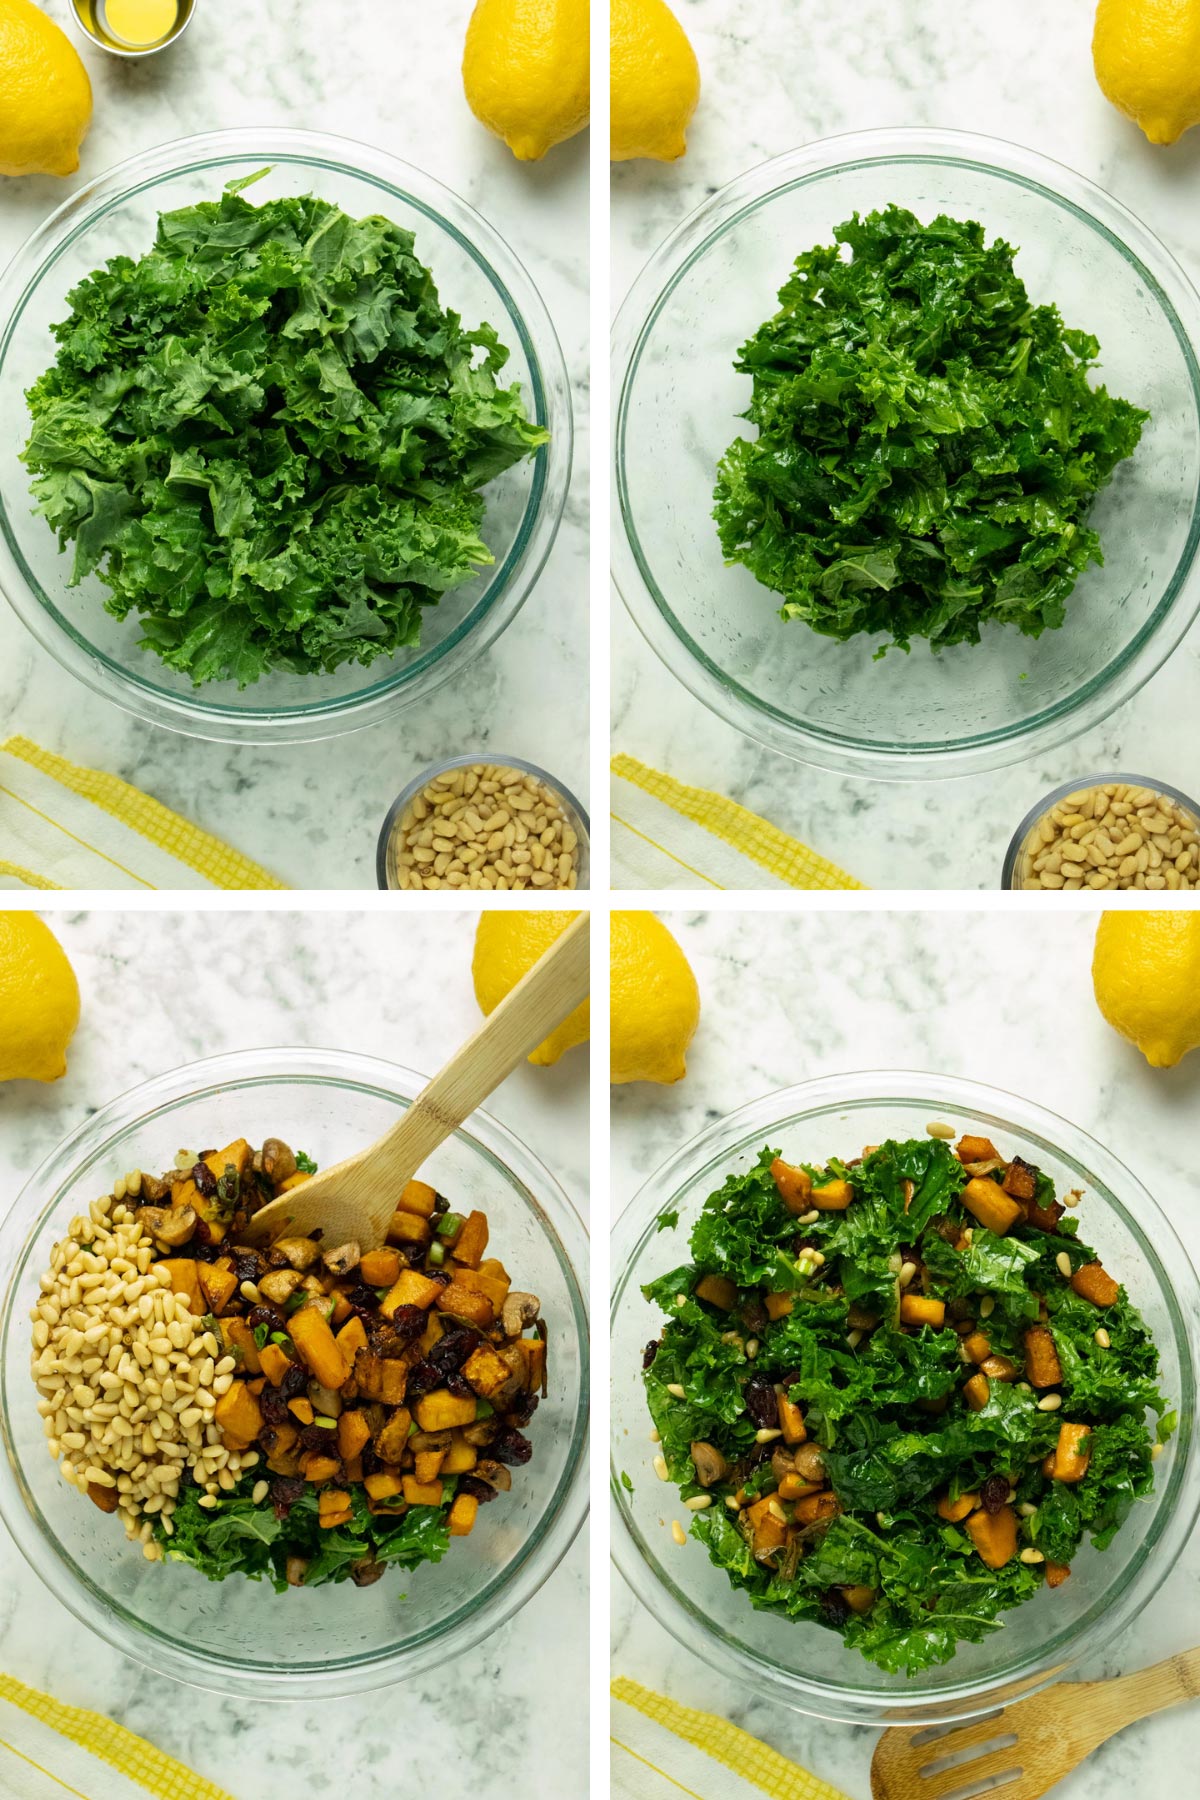 process collage showing the kale before and after massaging and before and after tossing with the squash mixture